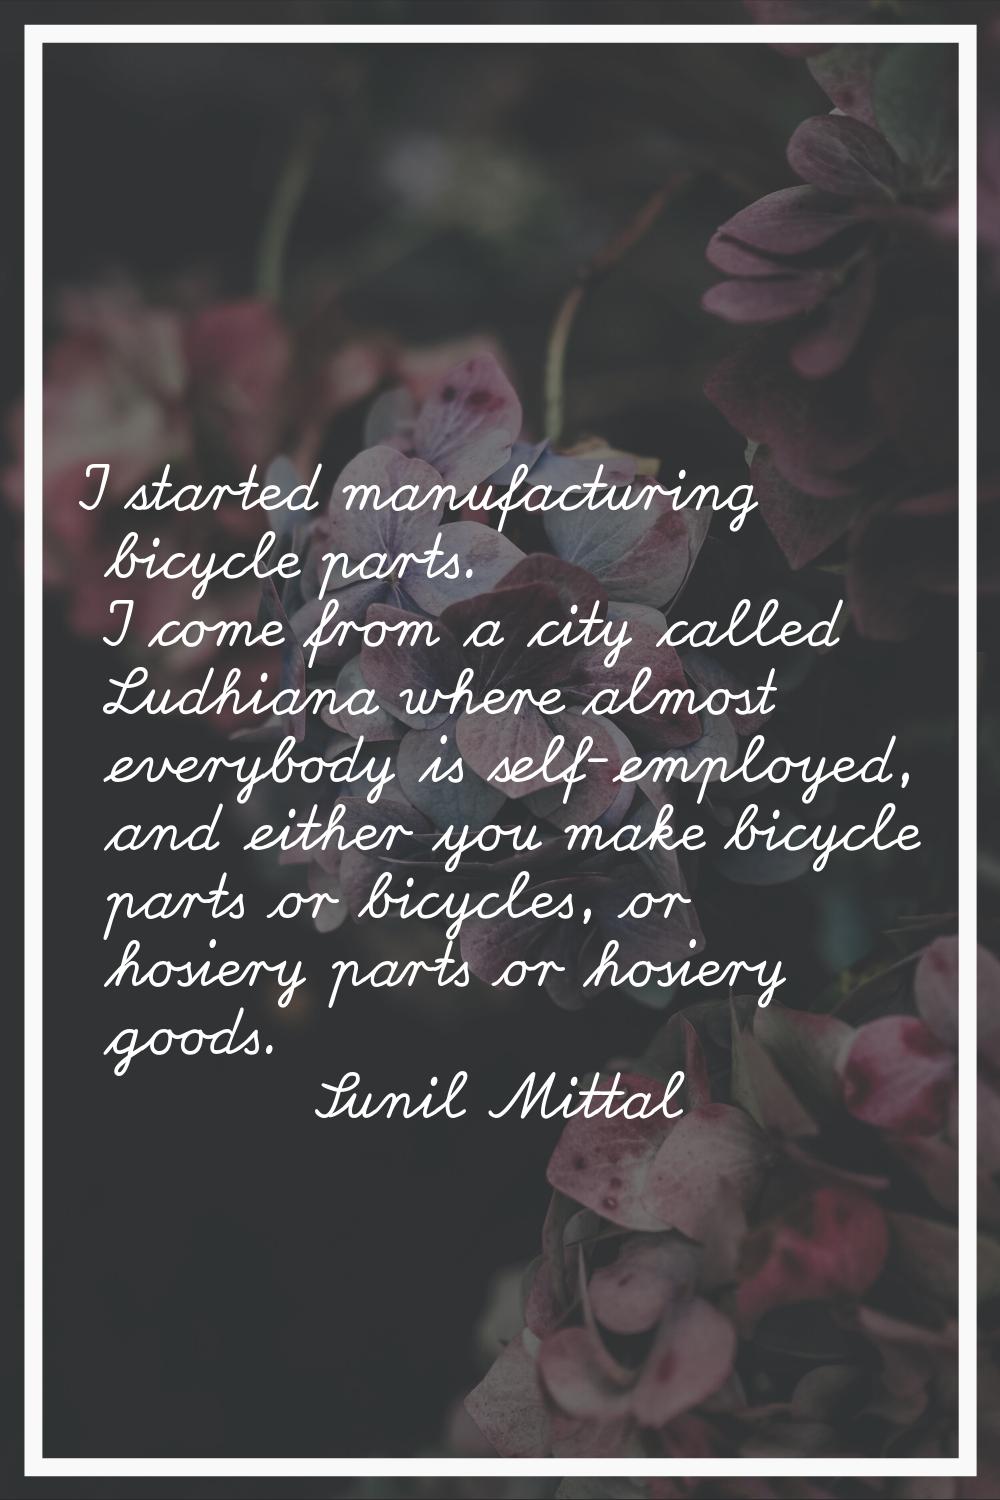 I started manufacturing bicycle parts. I come from a city called Ludhiana where almost everybody is